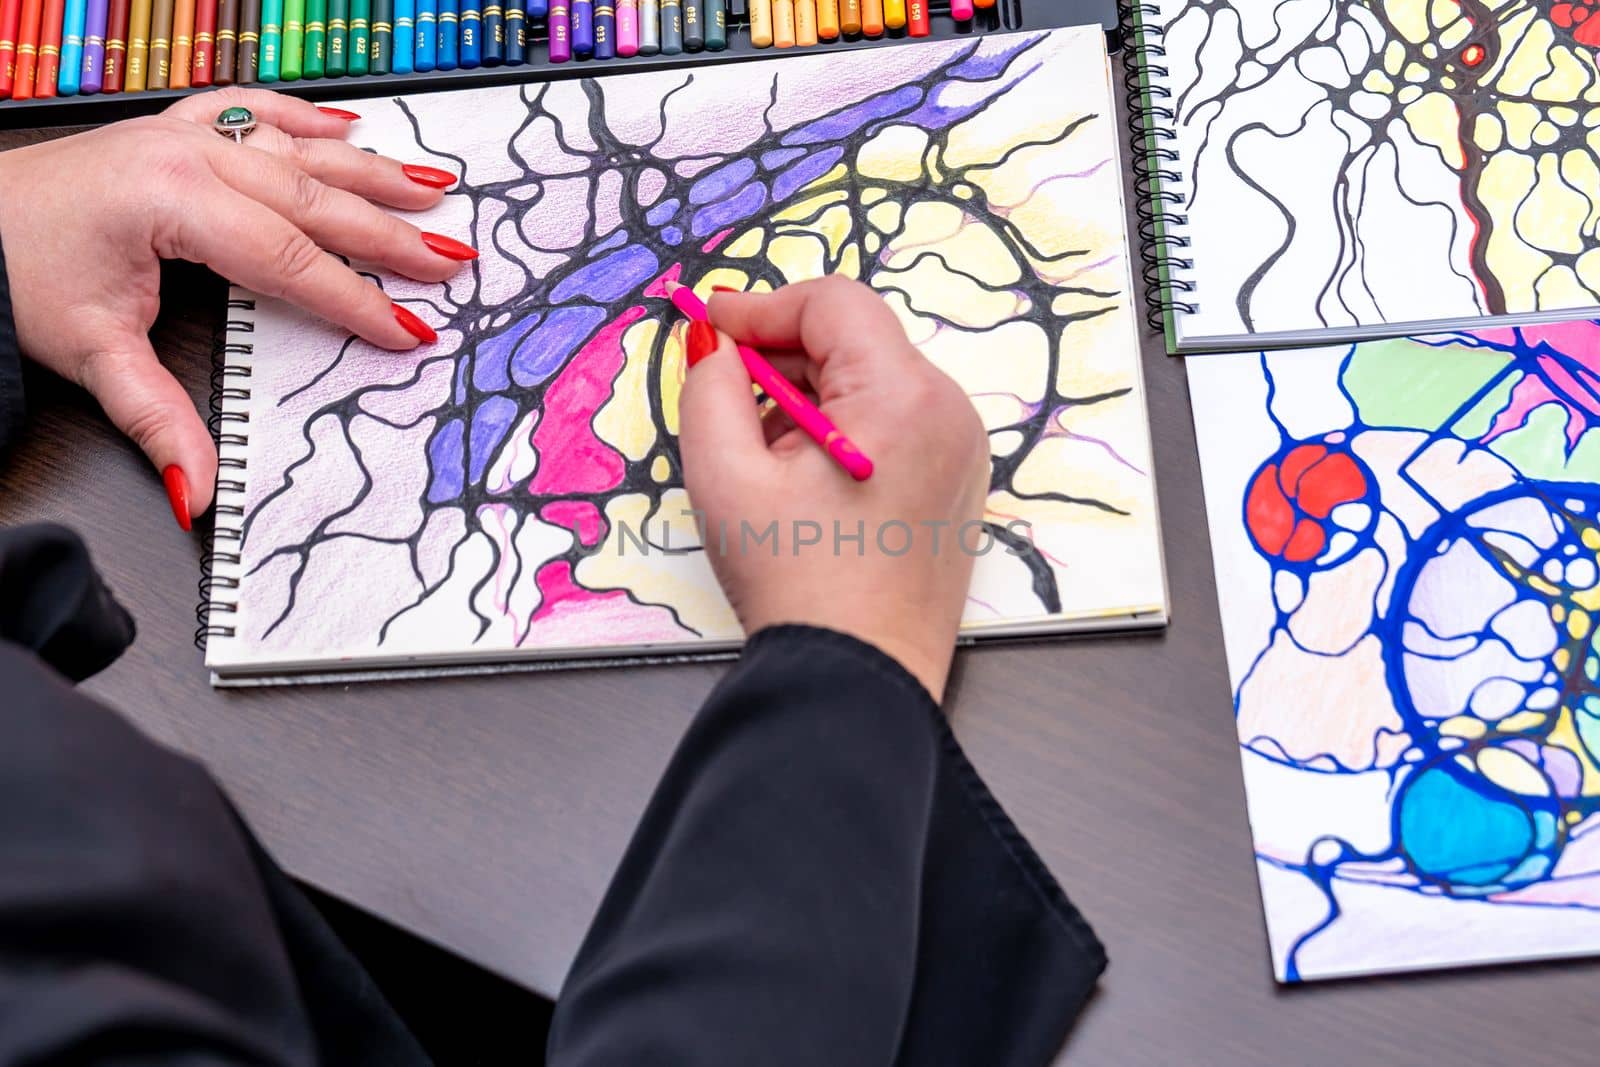 drawing neurographics with colored pencils on paper. High quality photo